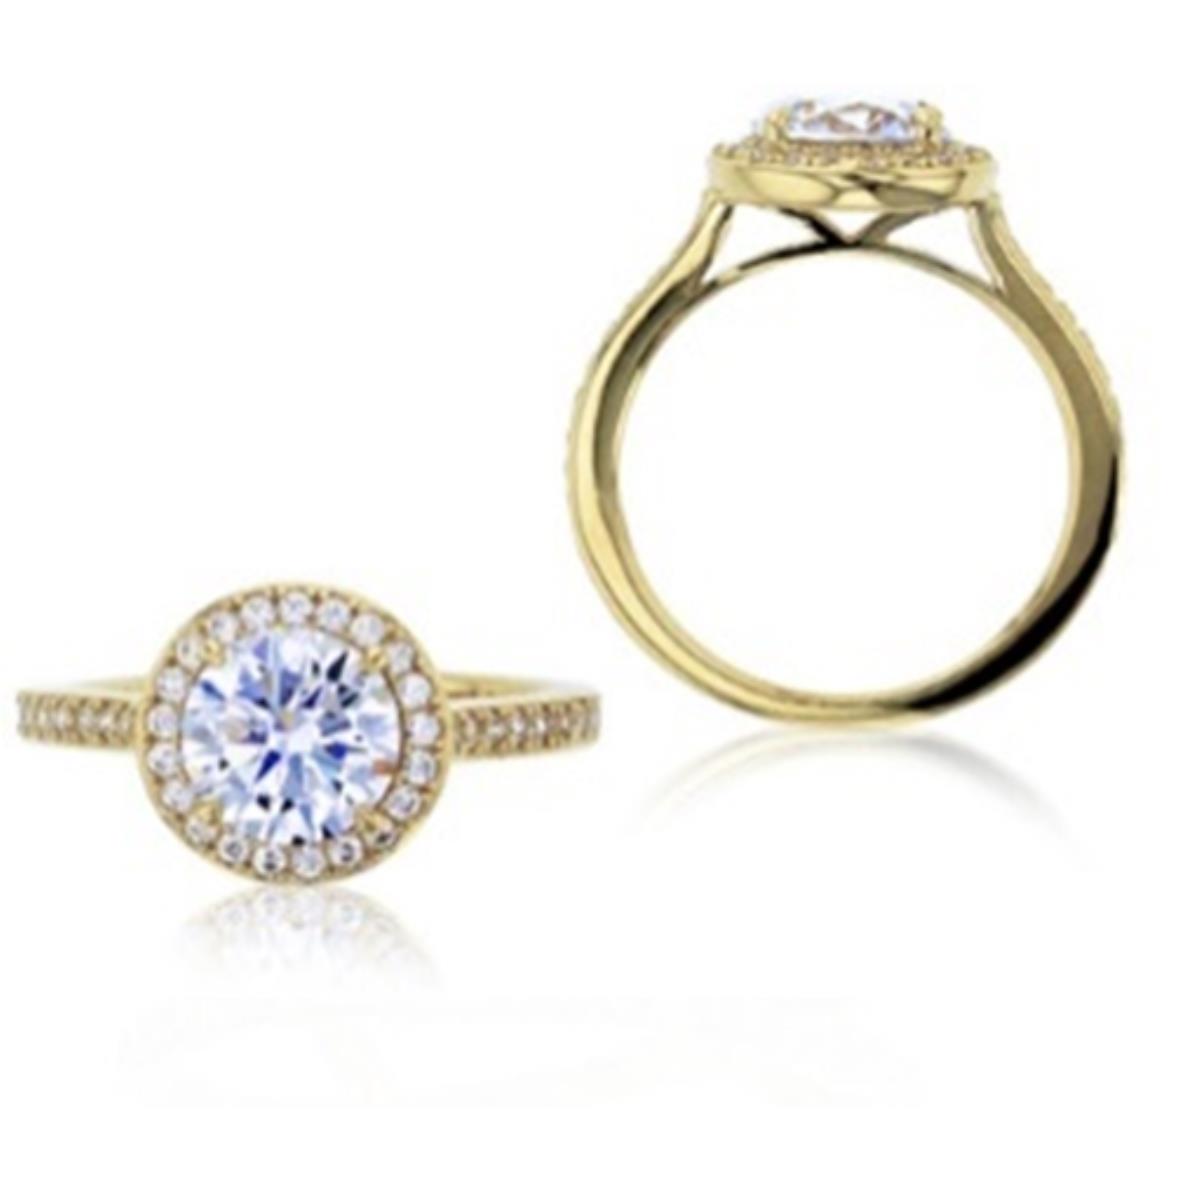 9K Yellow Gold 8mm Round Cut Halo Engagement Ring